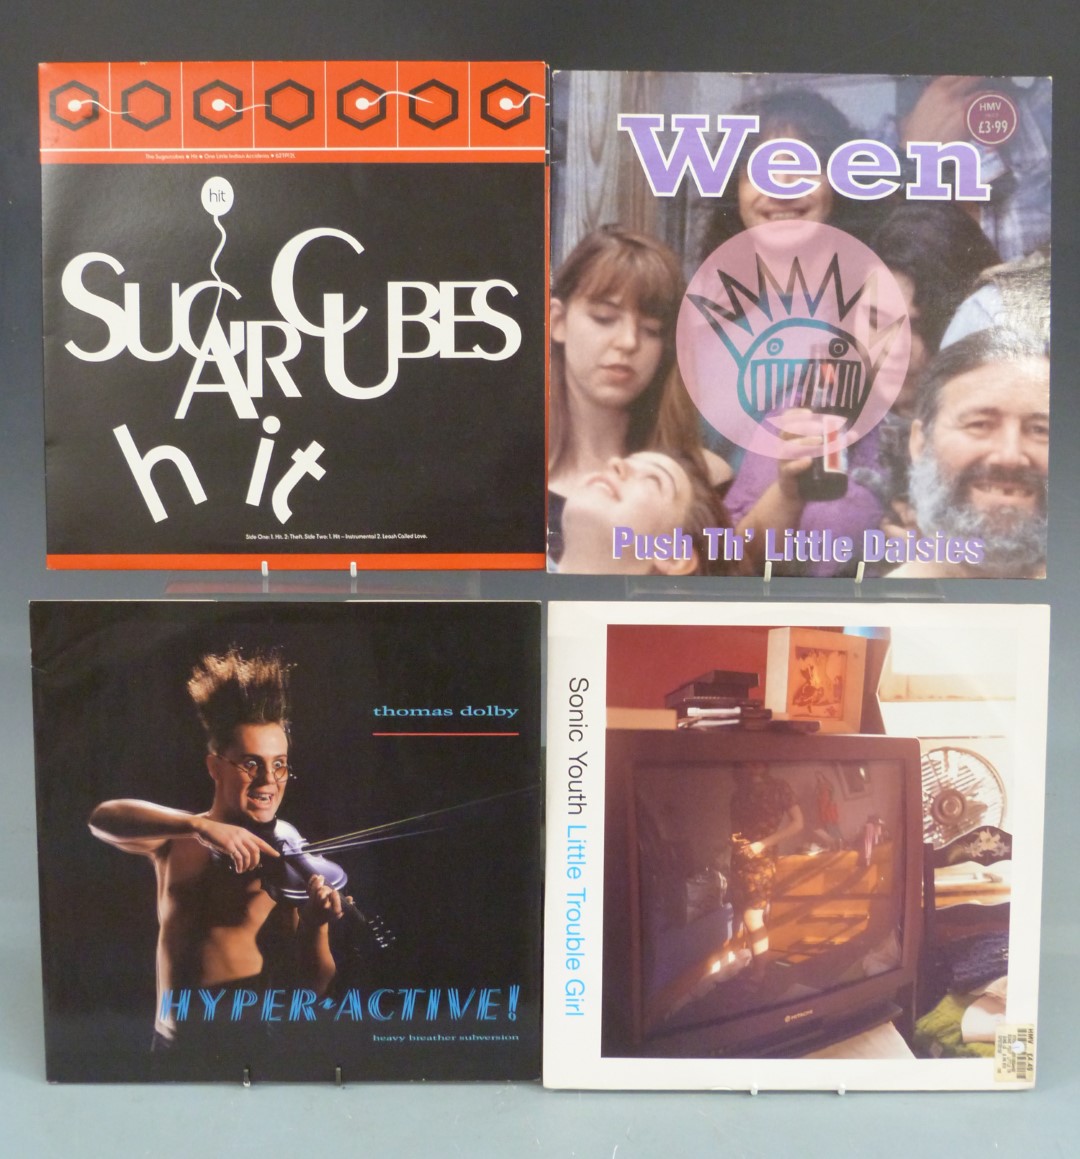 Twelve inch singles - 28 including The Cure, Oasis, Stone Roses, Nirvana, Pearl Jam, Sonic Youth,